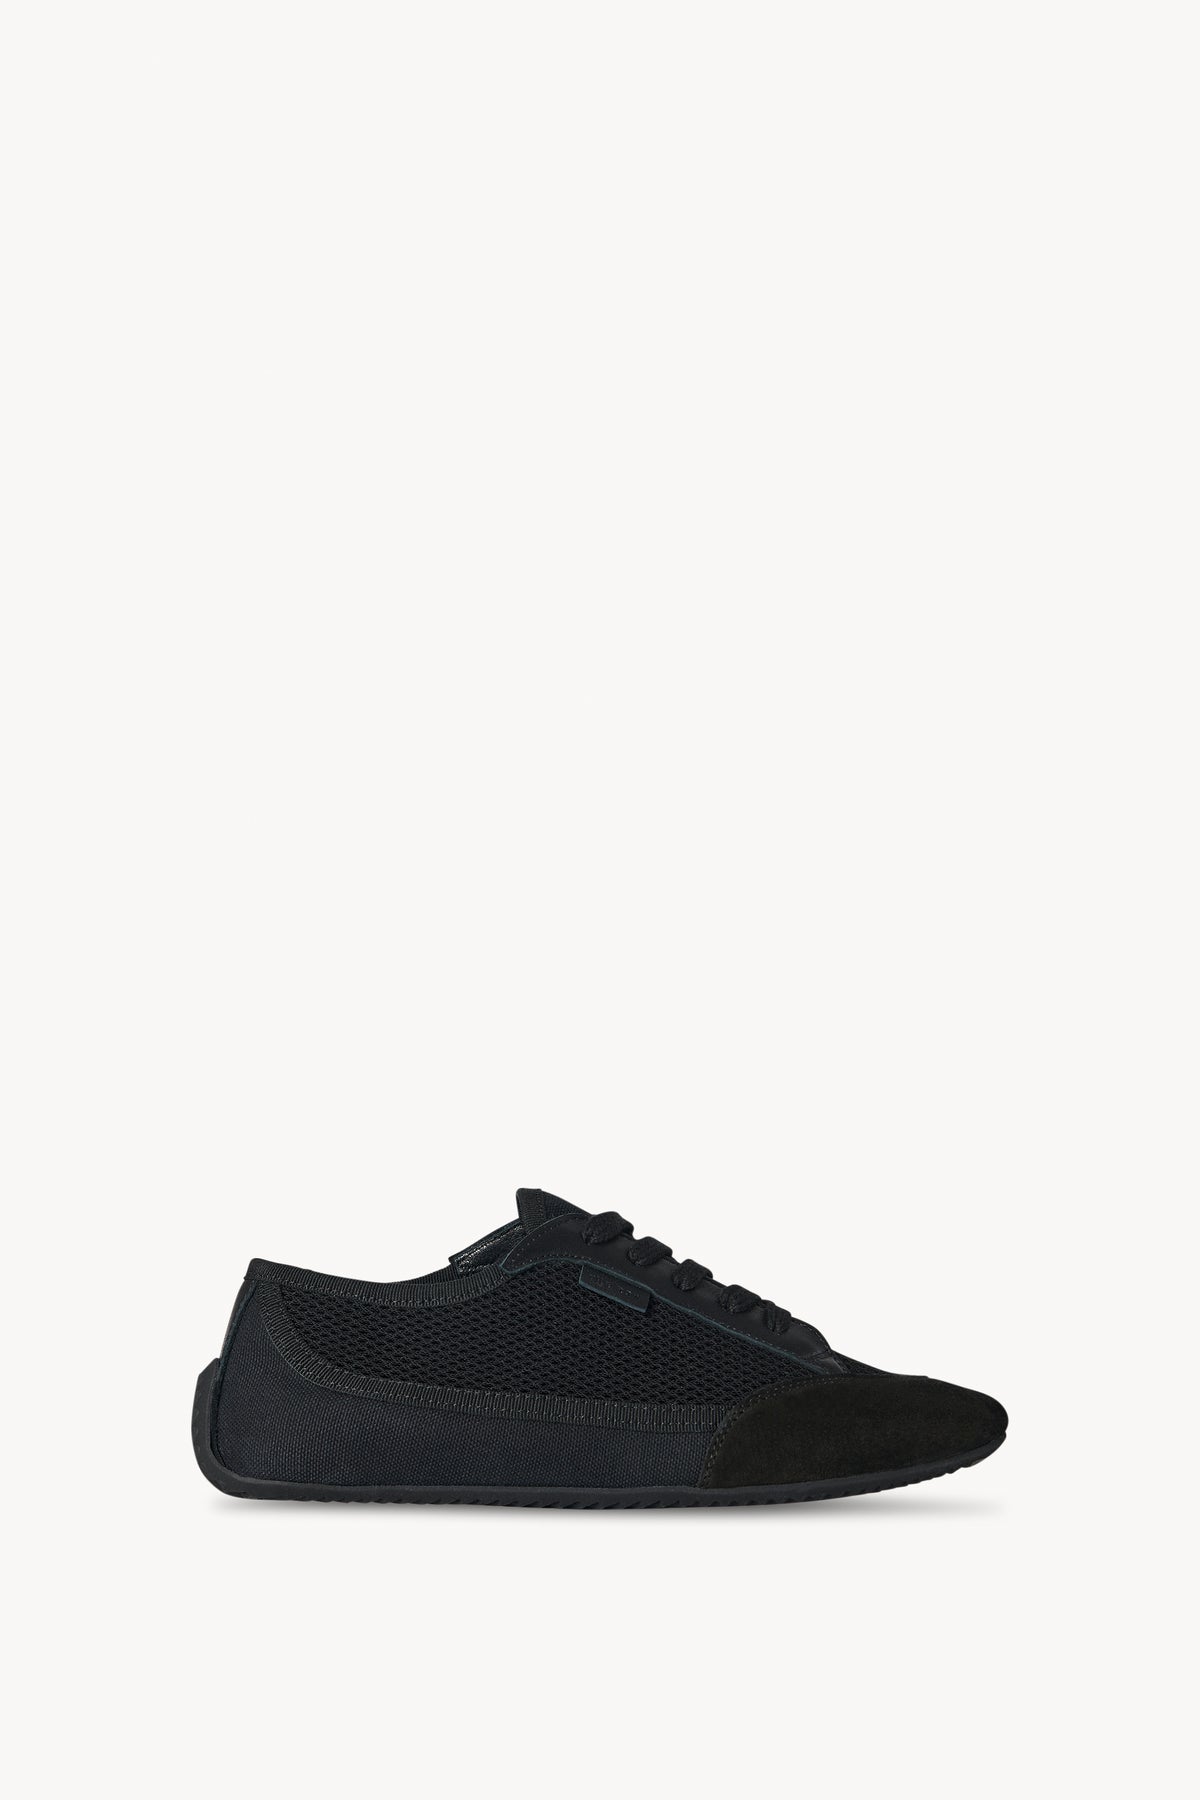 Bonnie Sneaker Black in Canvas and Suede – The Row